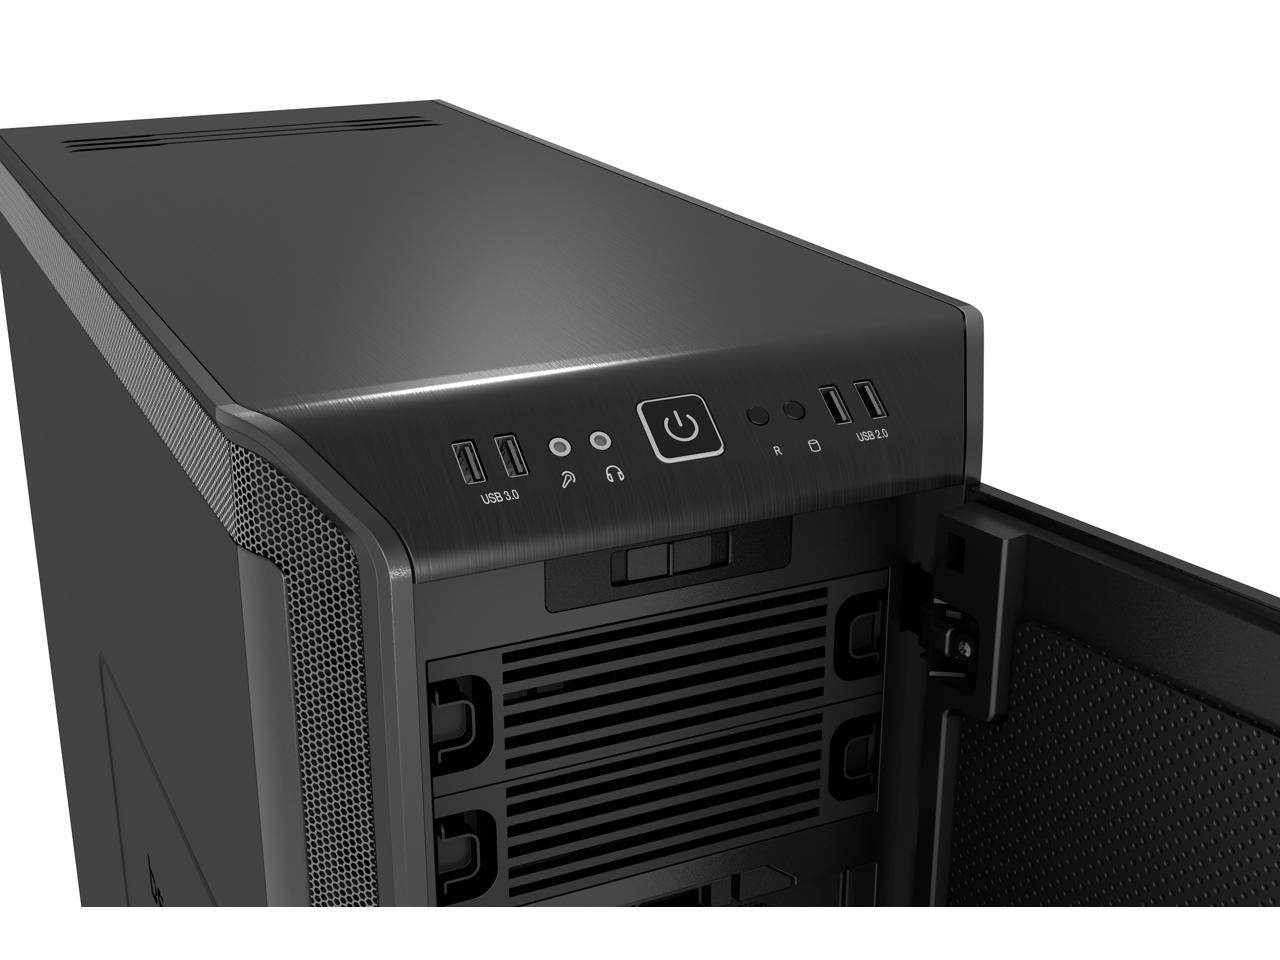 be quiet! DARK BASE 900 ATX Full Tower Computer Chassis - Black